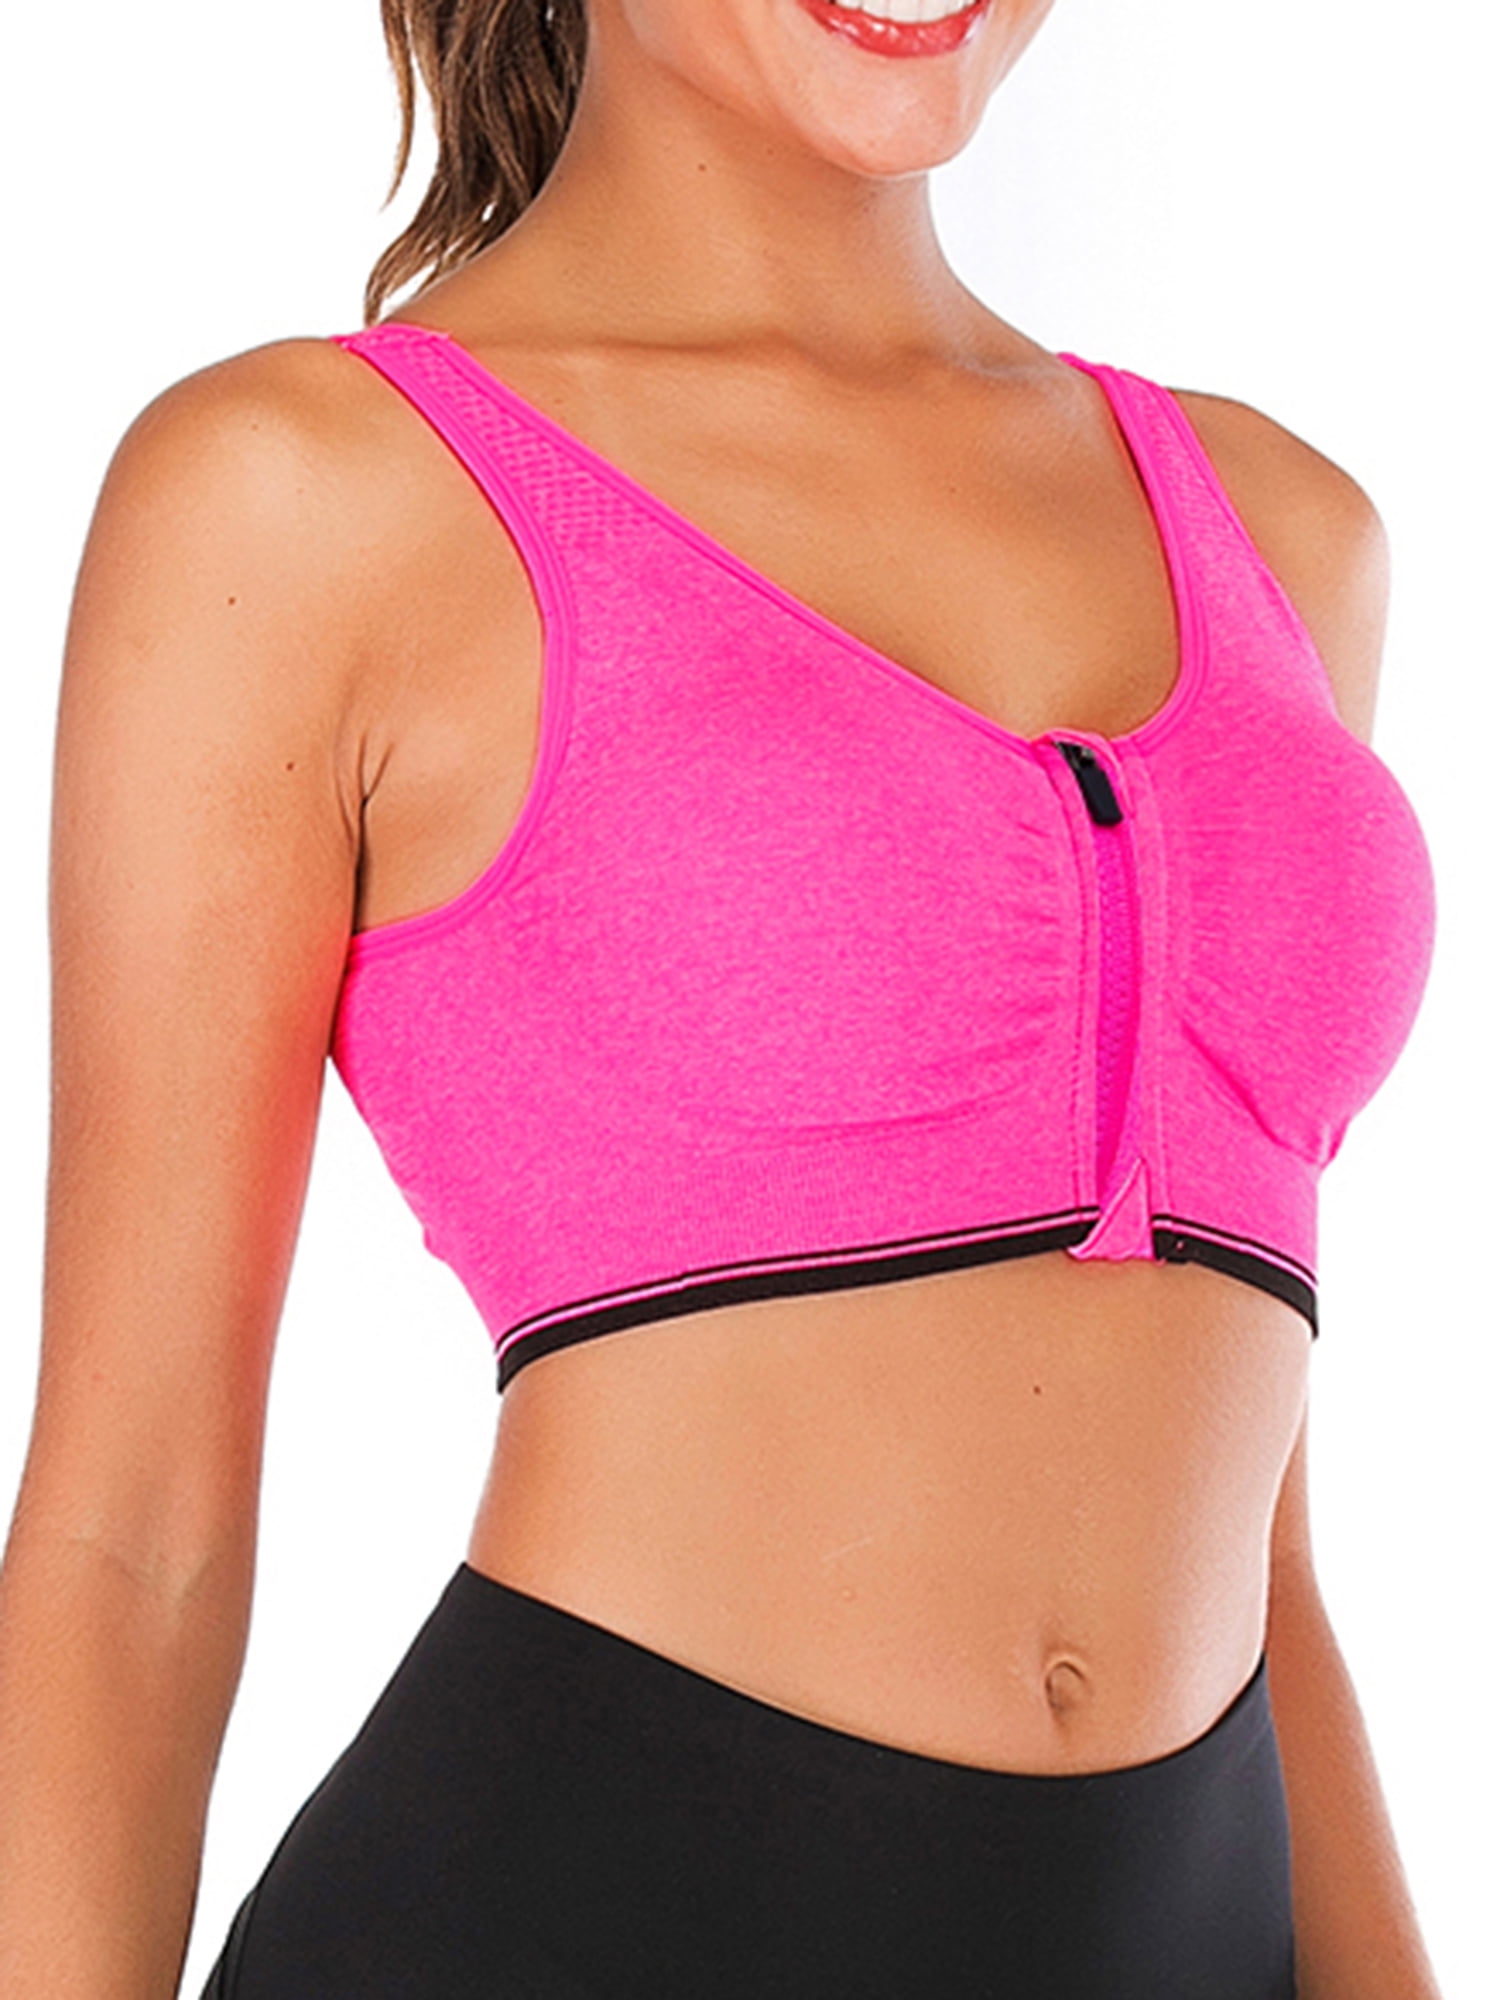 NCTCITY Women's Sports Bra High Impact Support Bras Front Zip